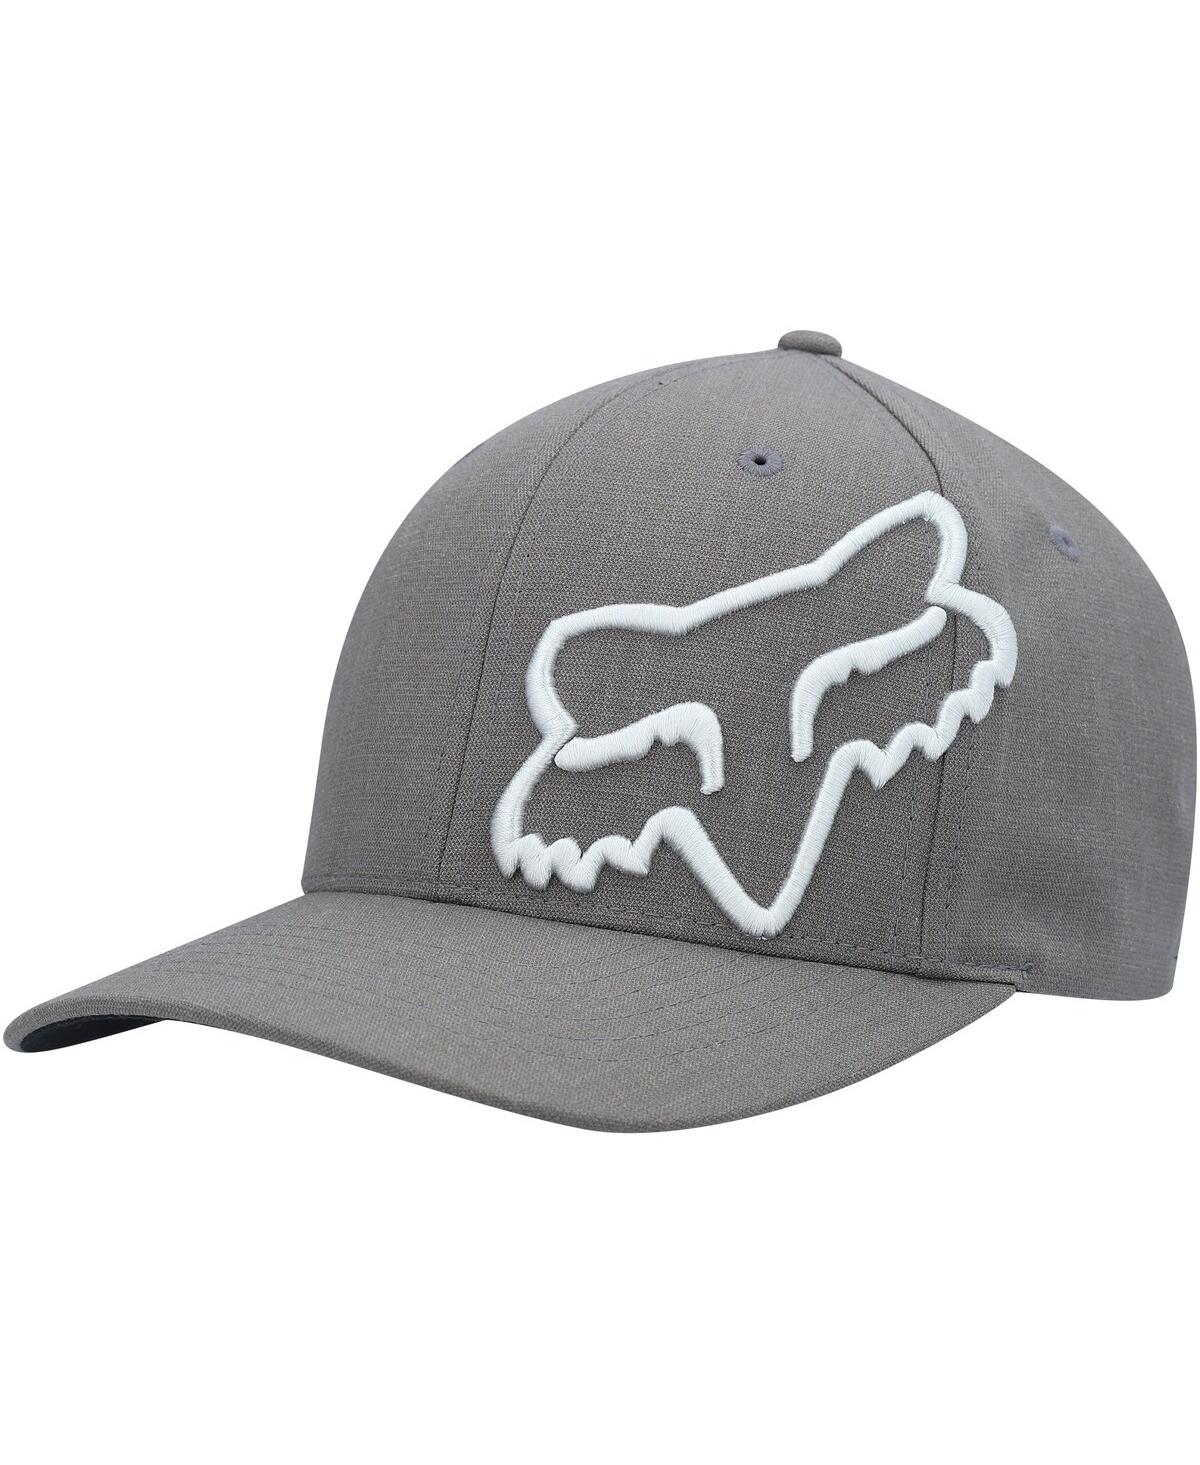 Men's Heathered Gray Clouded 2.0 Flexfit Hat - Heathered Gray